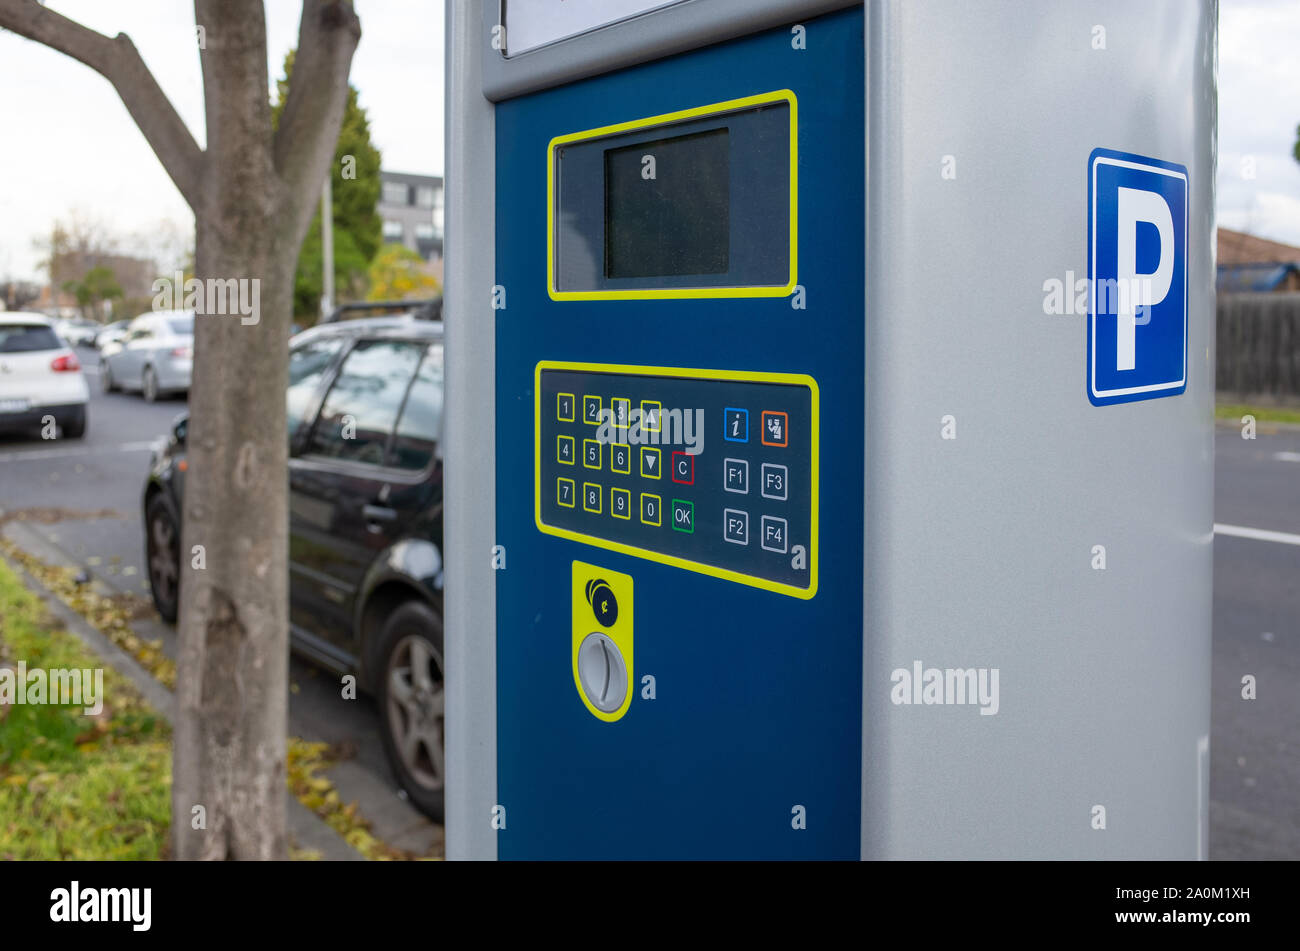 A coin operated ticket machine/pay station for roadside parking. Melbourne, VIC Australia. Stock Photo